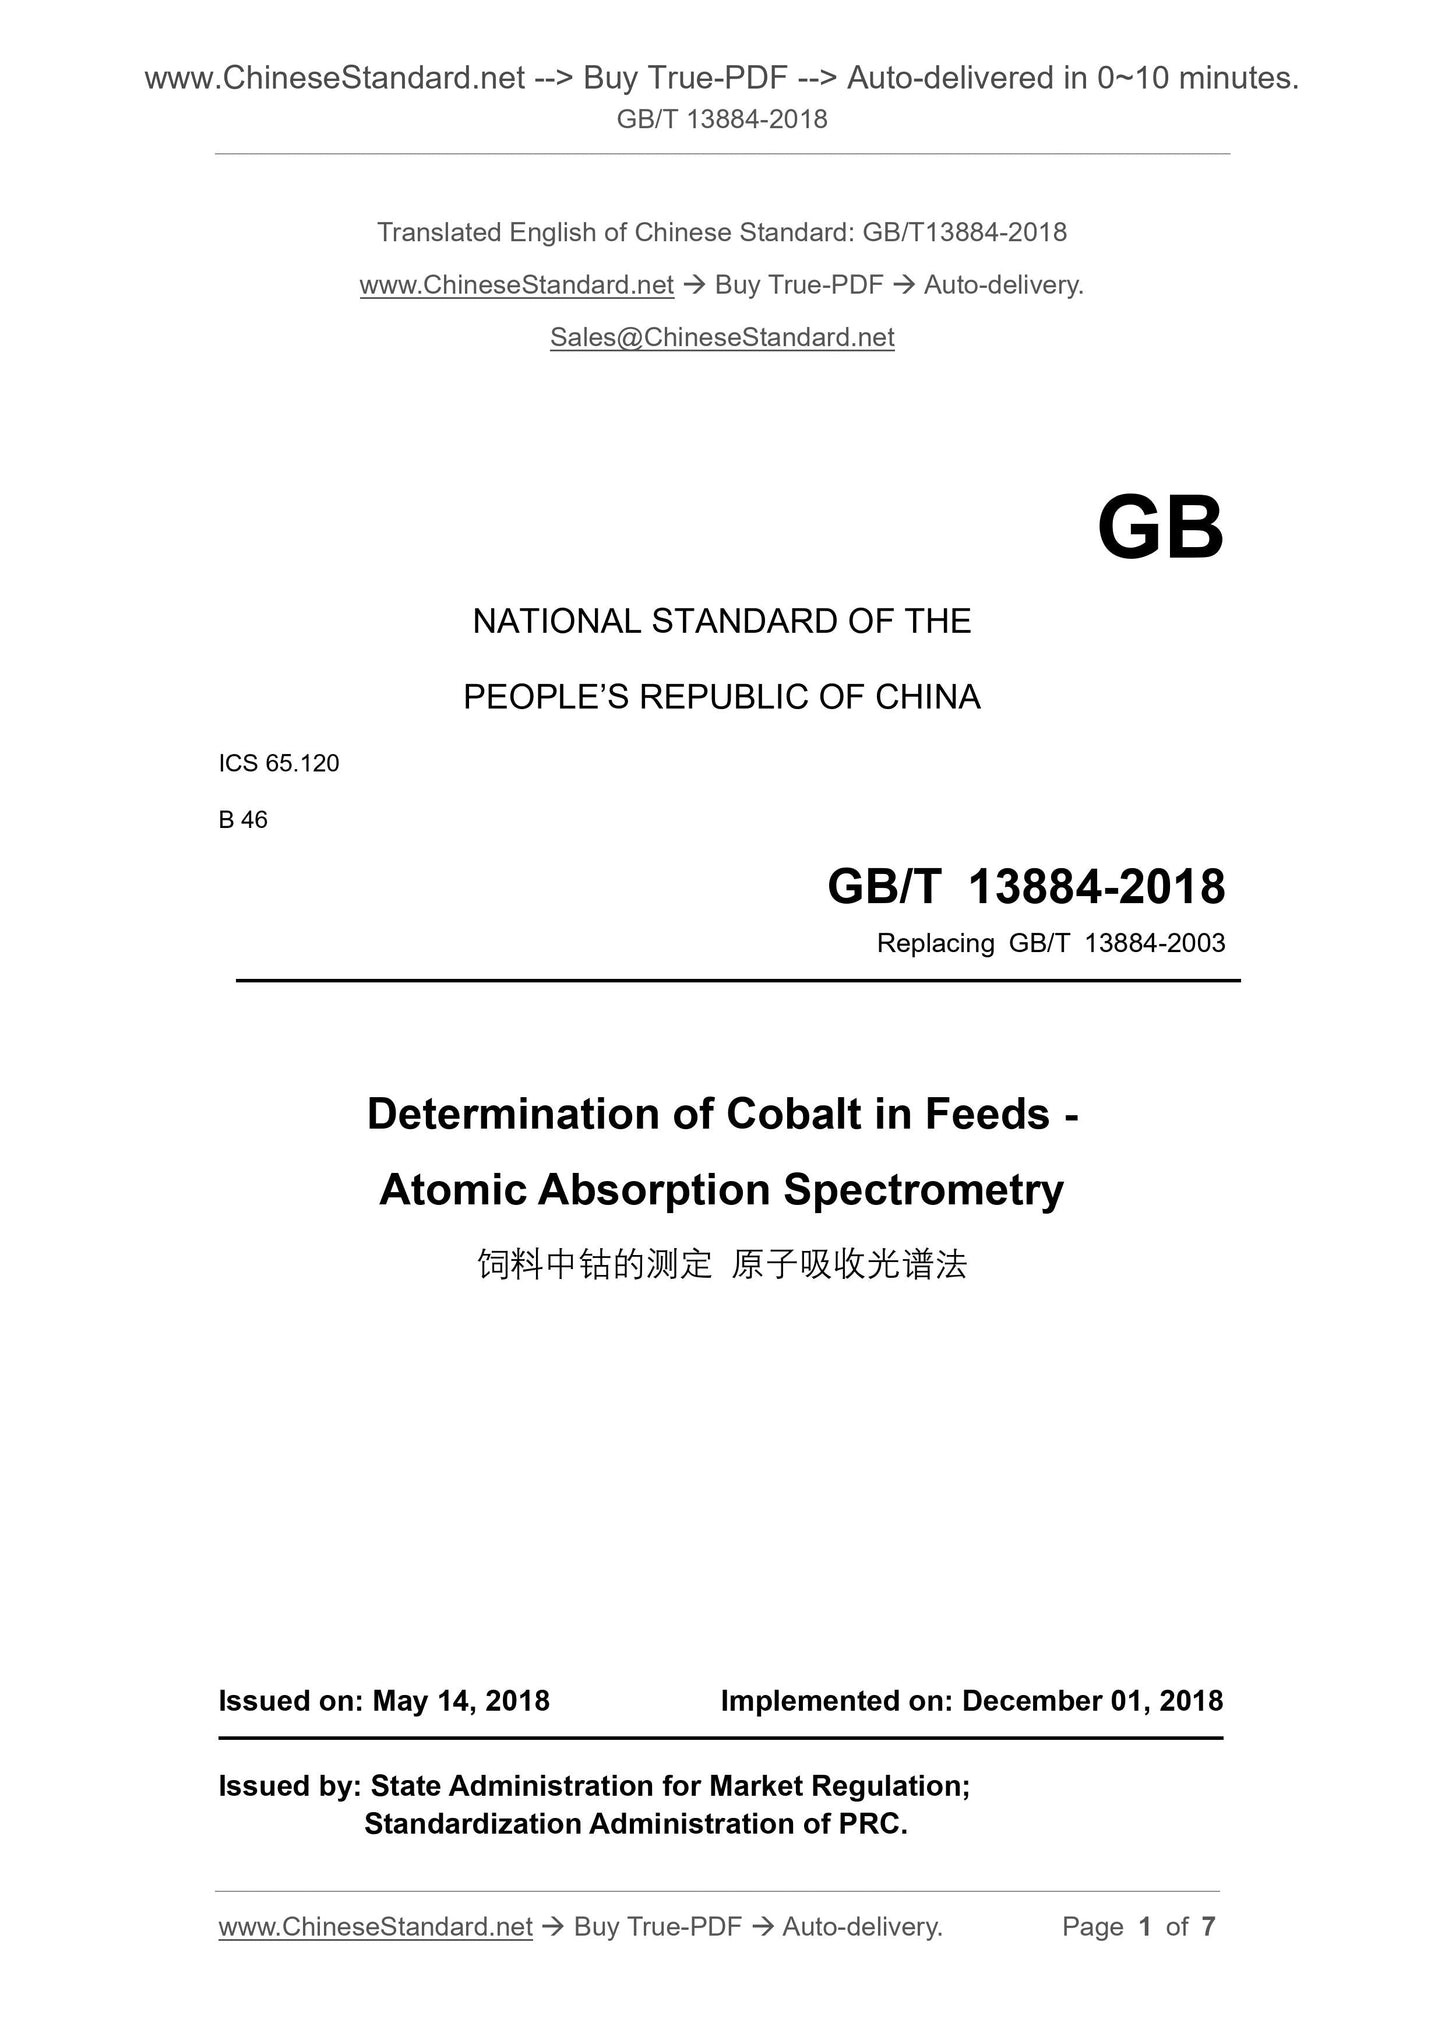 GB/T 13884-2018 Page 1